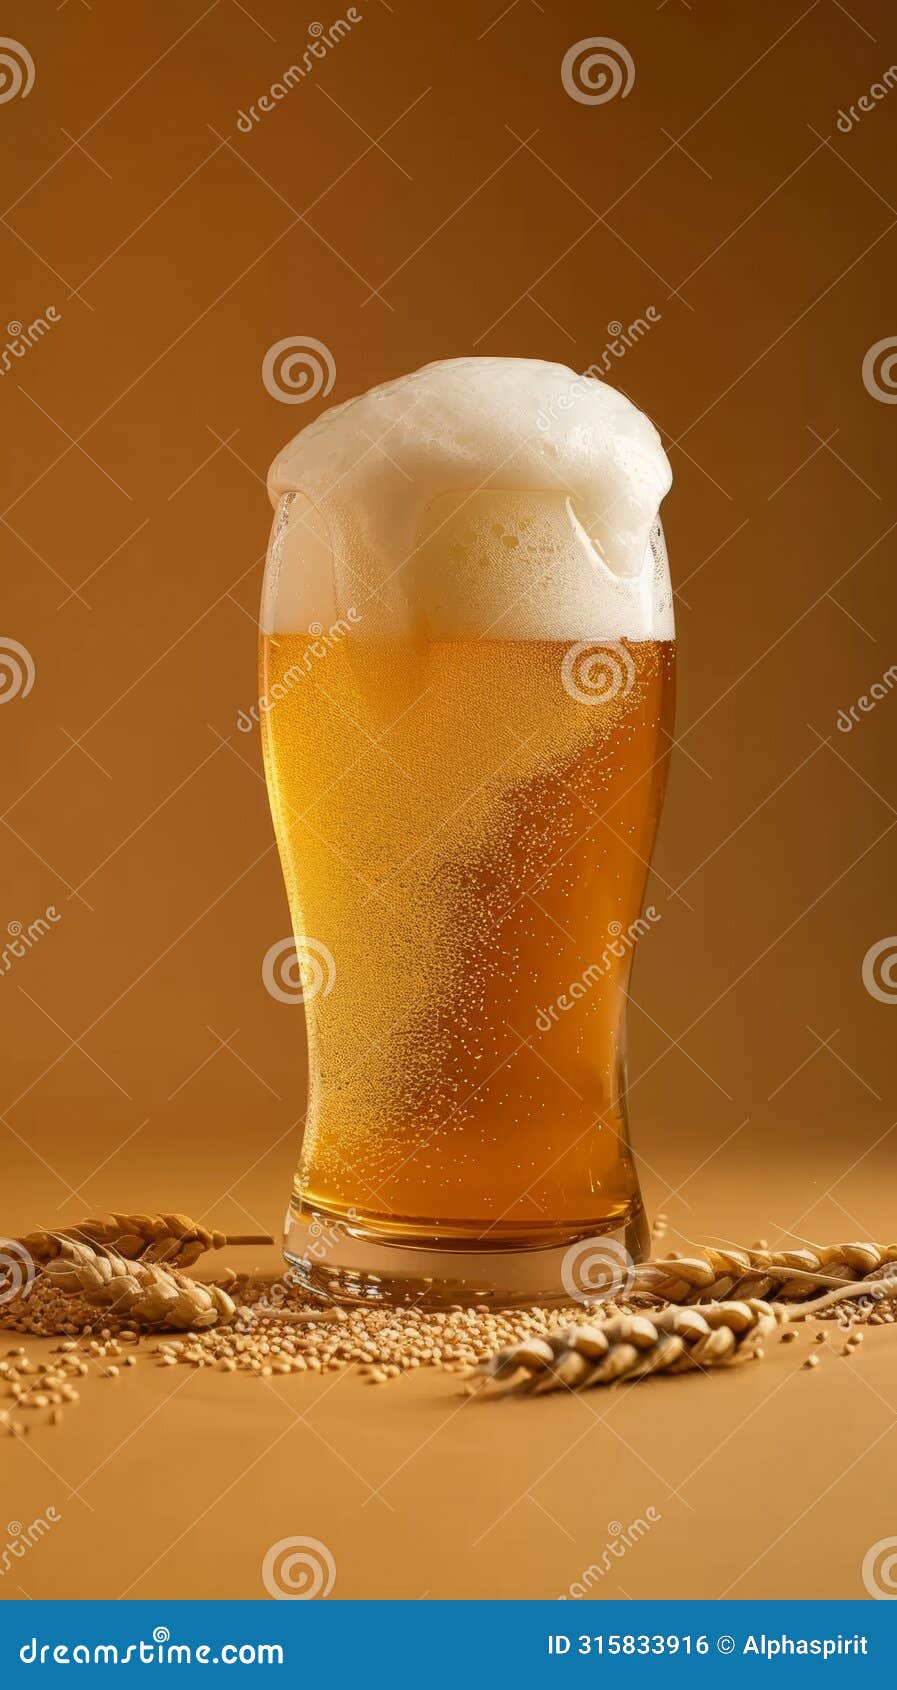 golden beer and frothy head in a clear glass, with scattered barley grains on an amber background